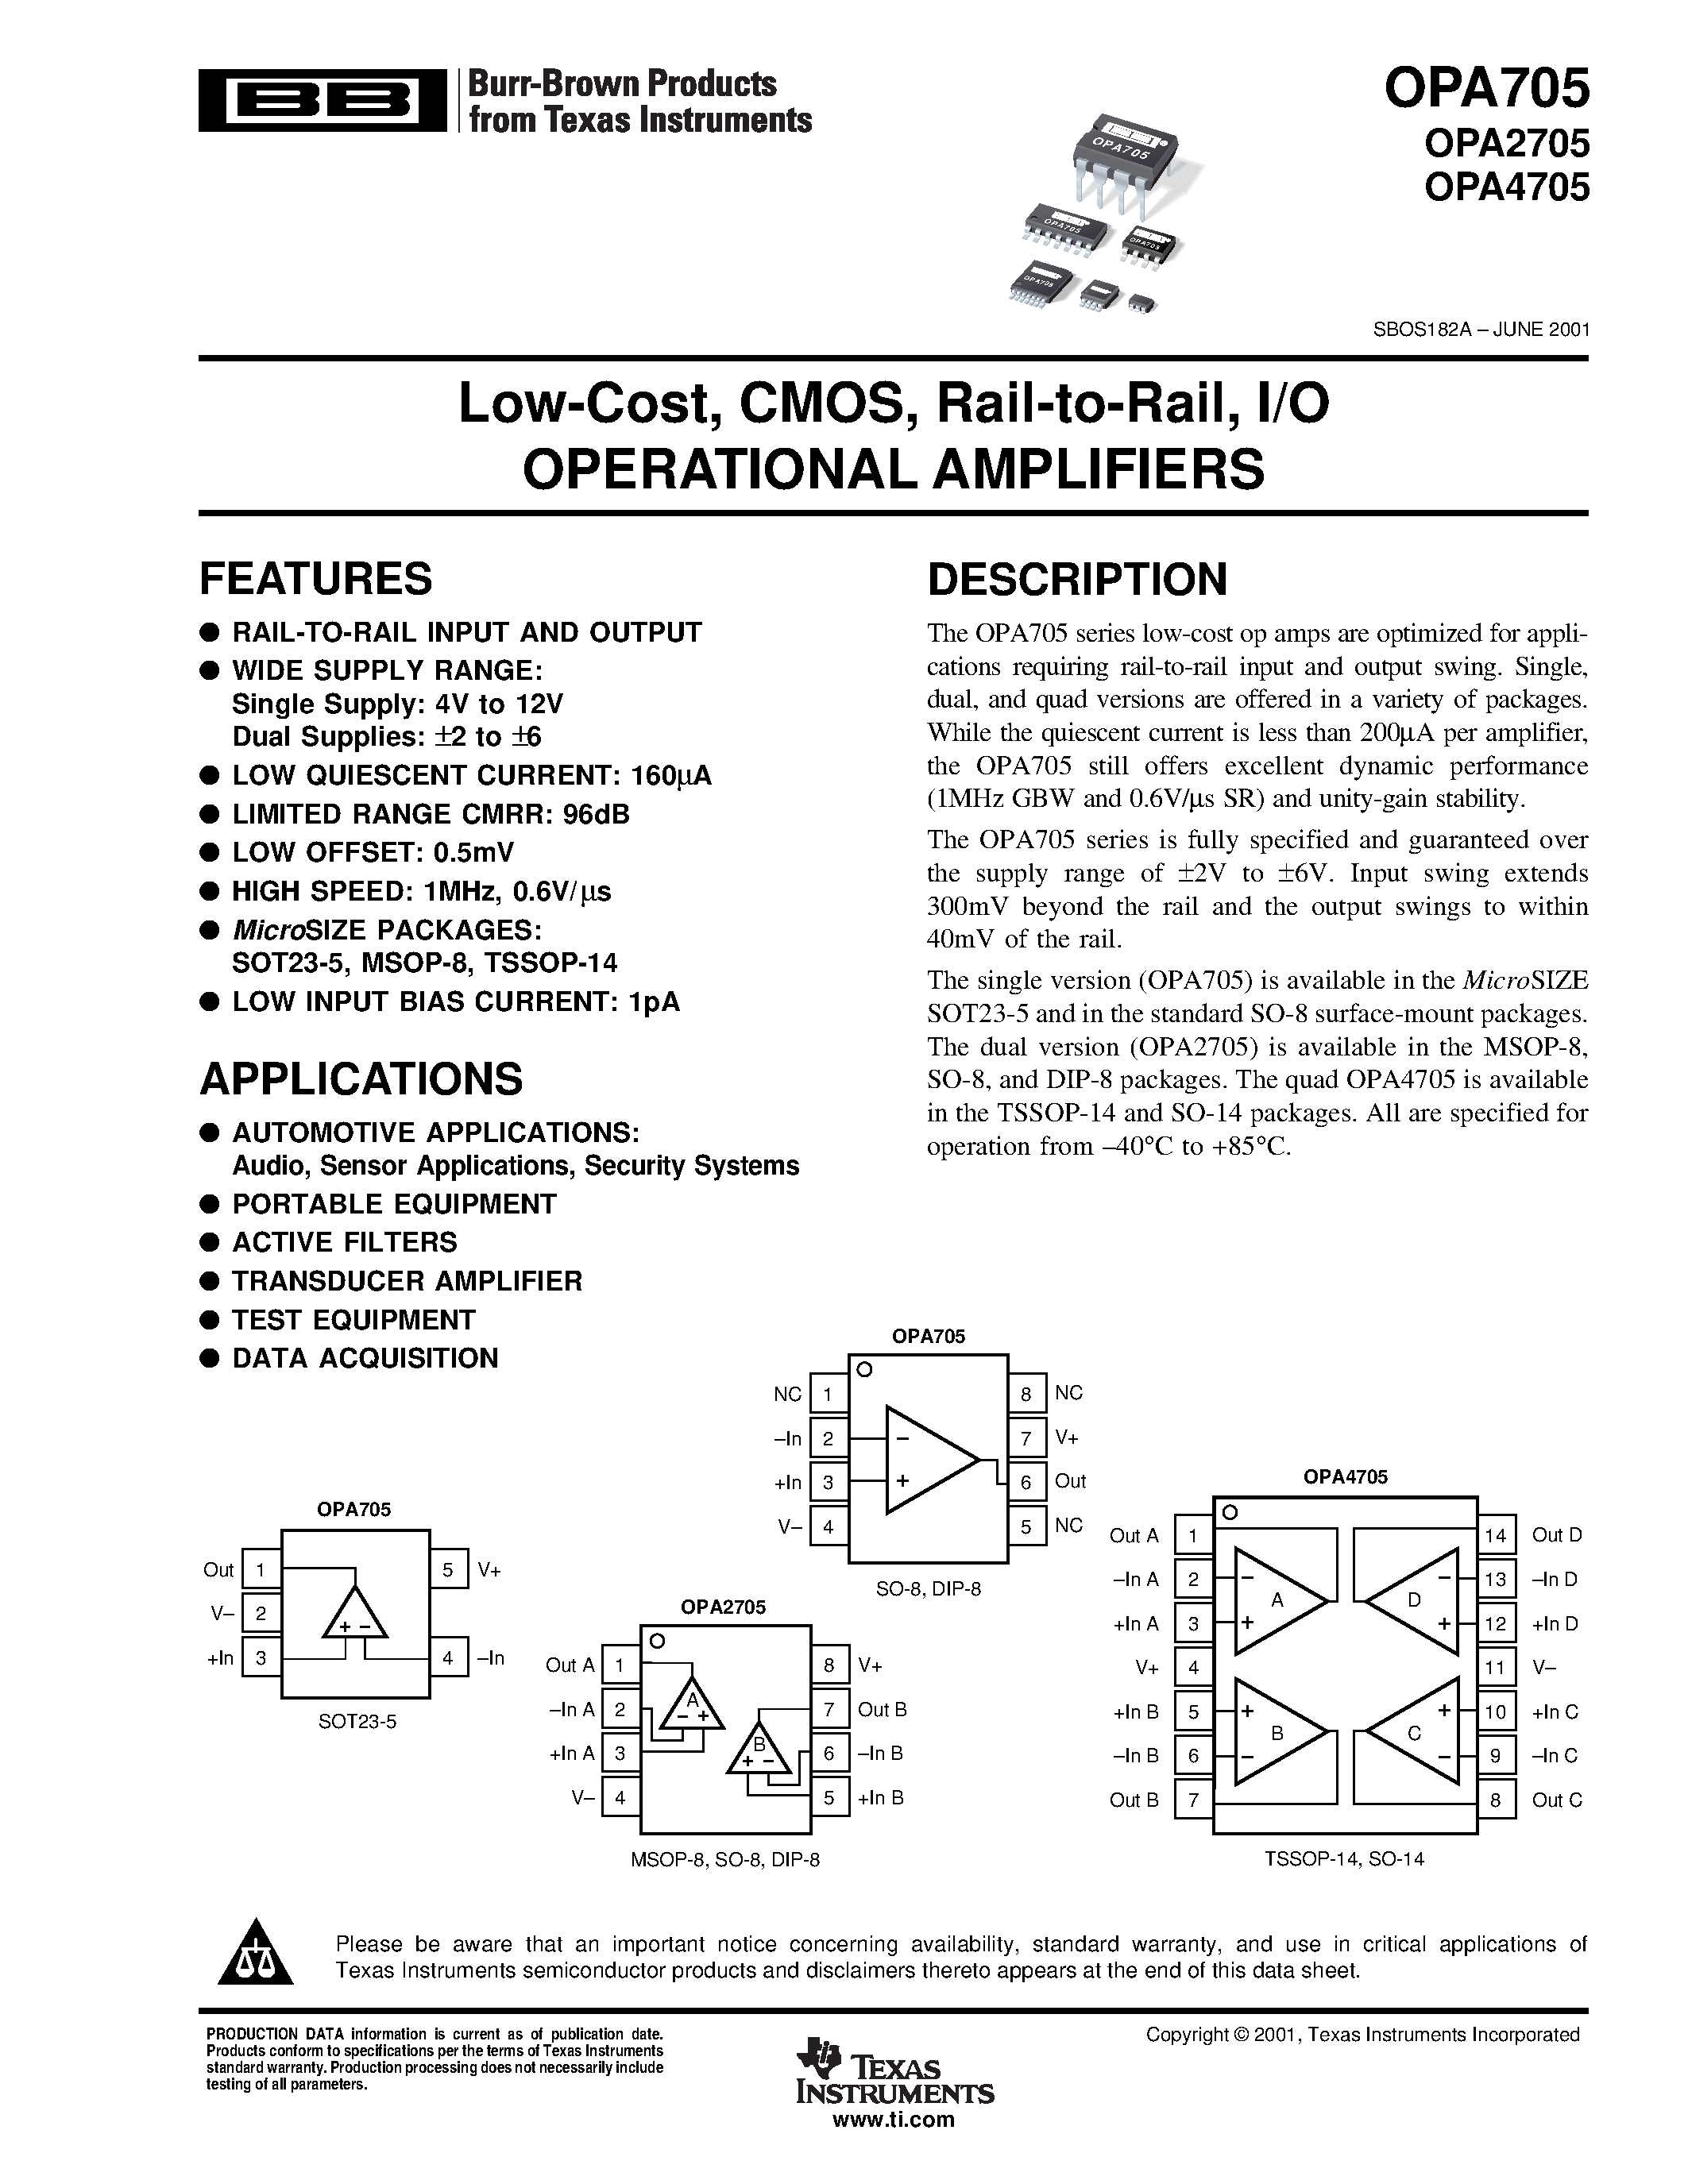 Datasheet OPA4705 - Low-Cost / CMOS / Rail-to-Rail / I/O OPERATIONAL AMPLIFIERS page 1